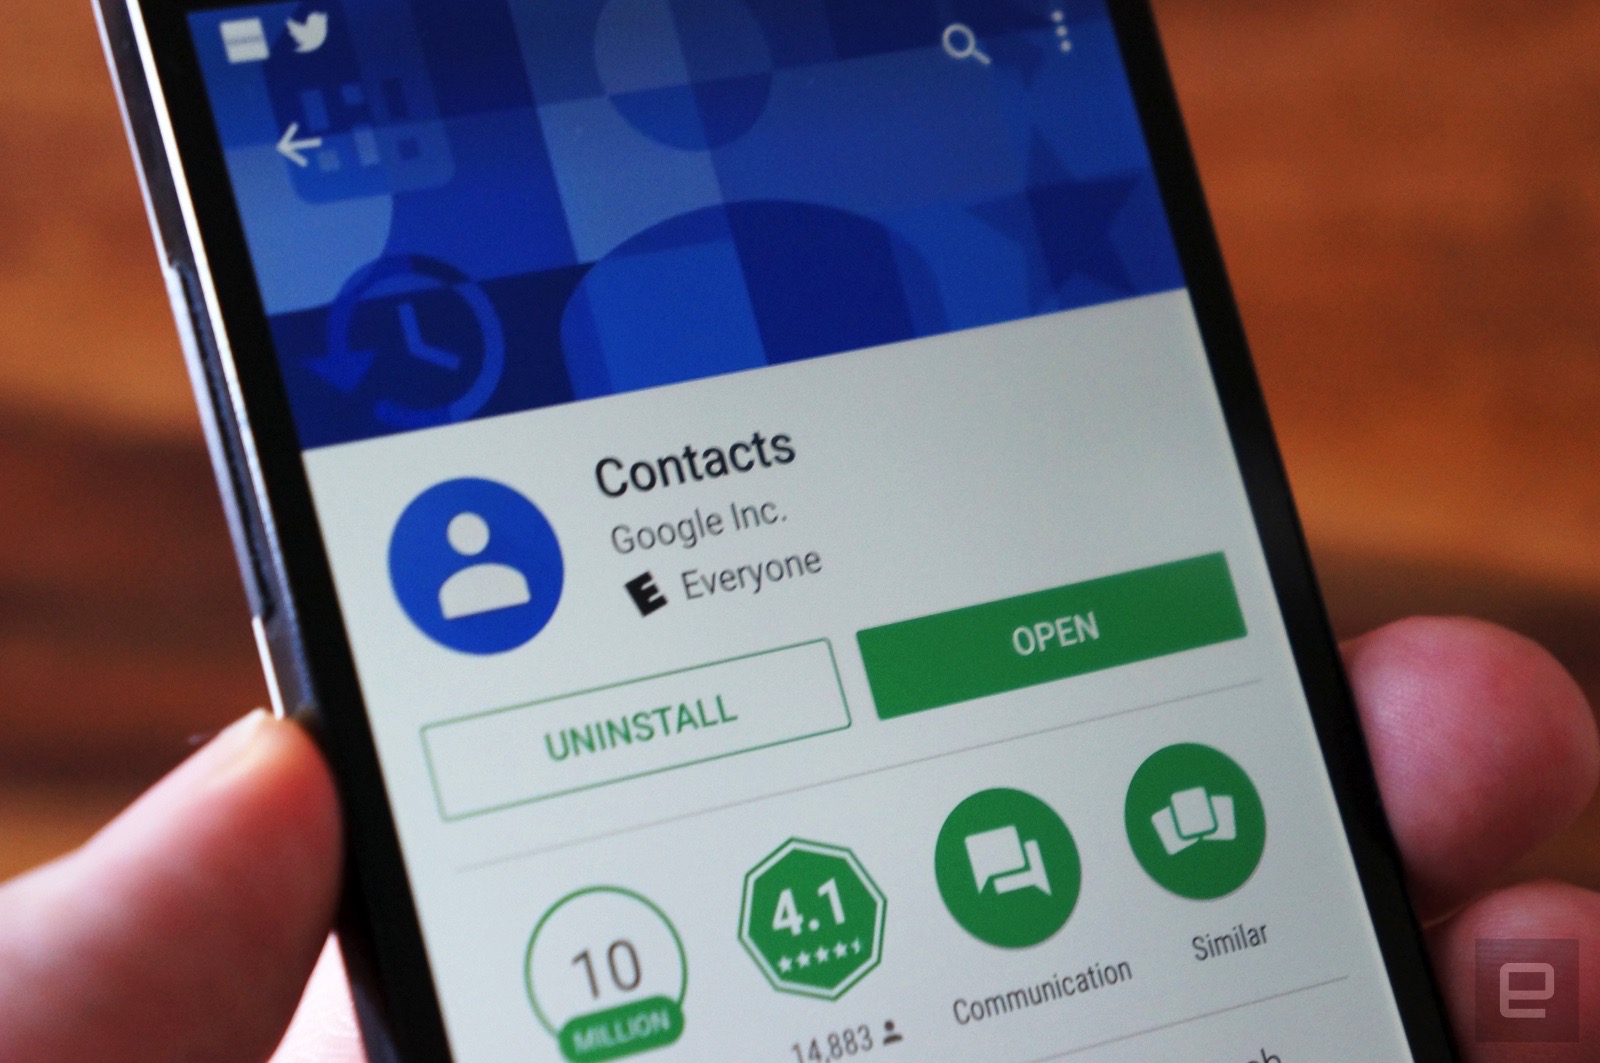 way to get Google's official, dedicated Android contacts app was to pi...